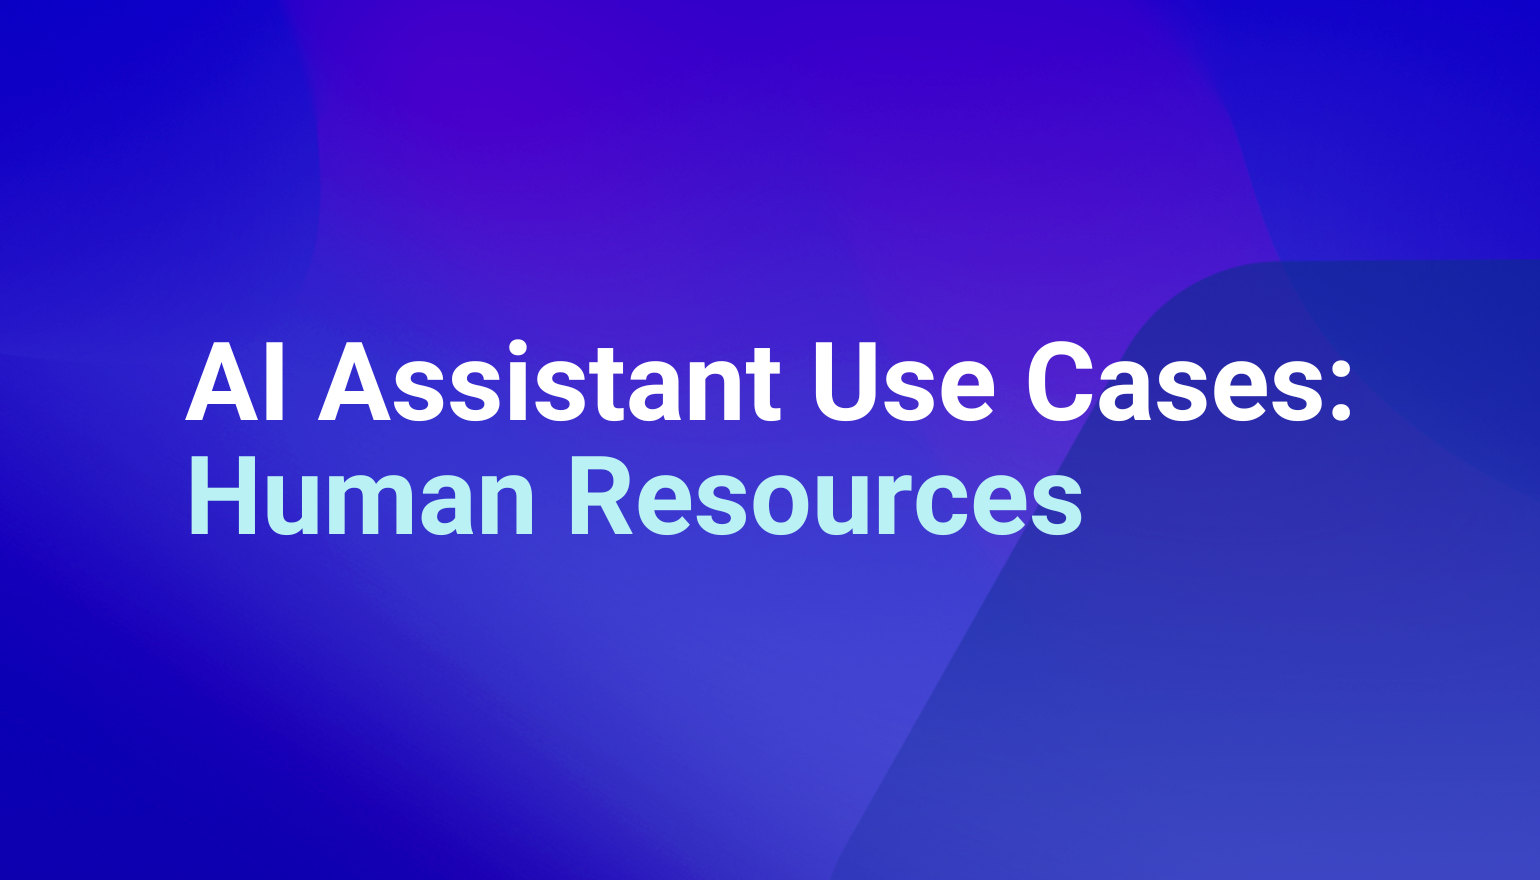 AI Assistant Use Cases for Human Resources